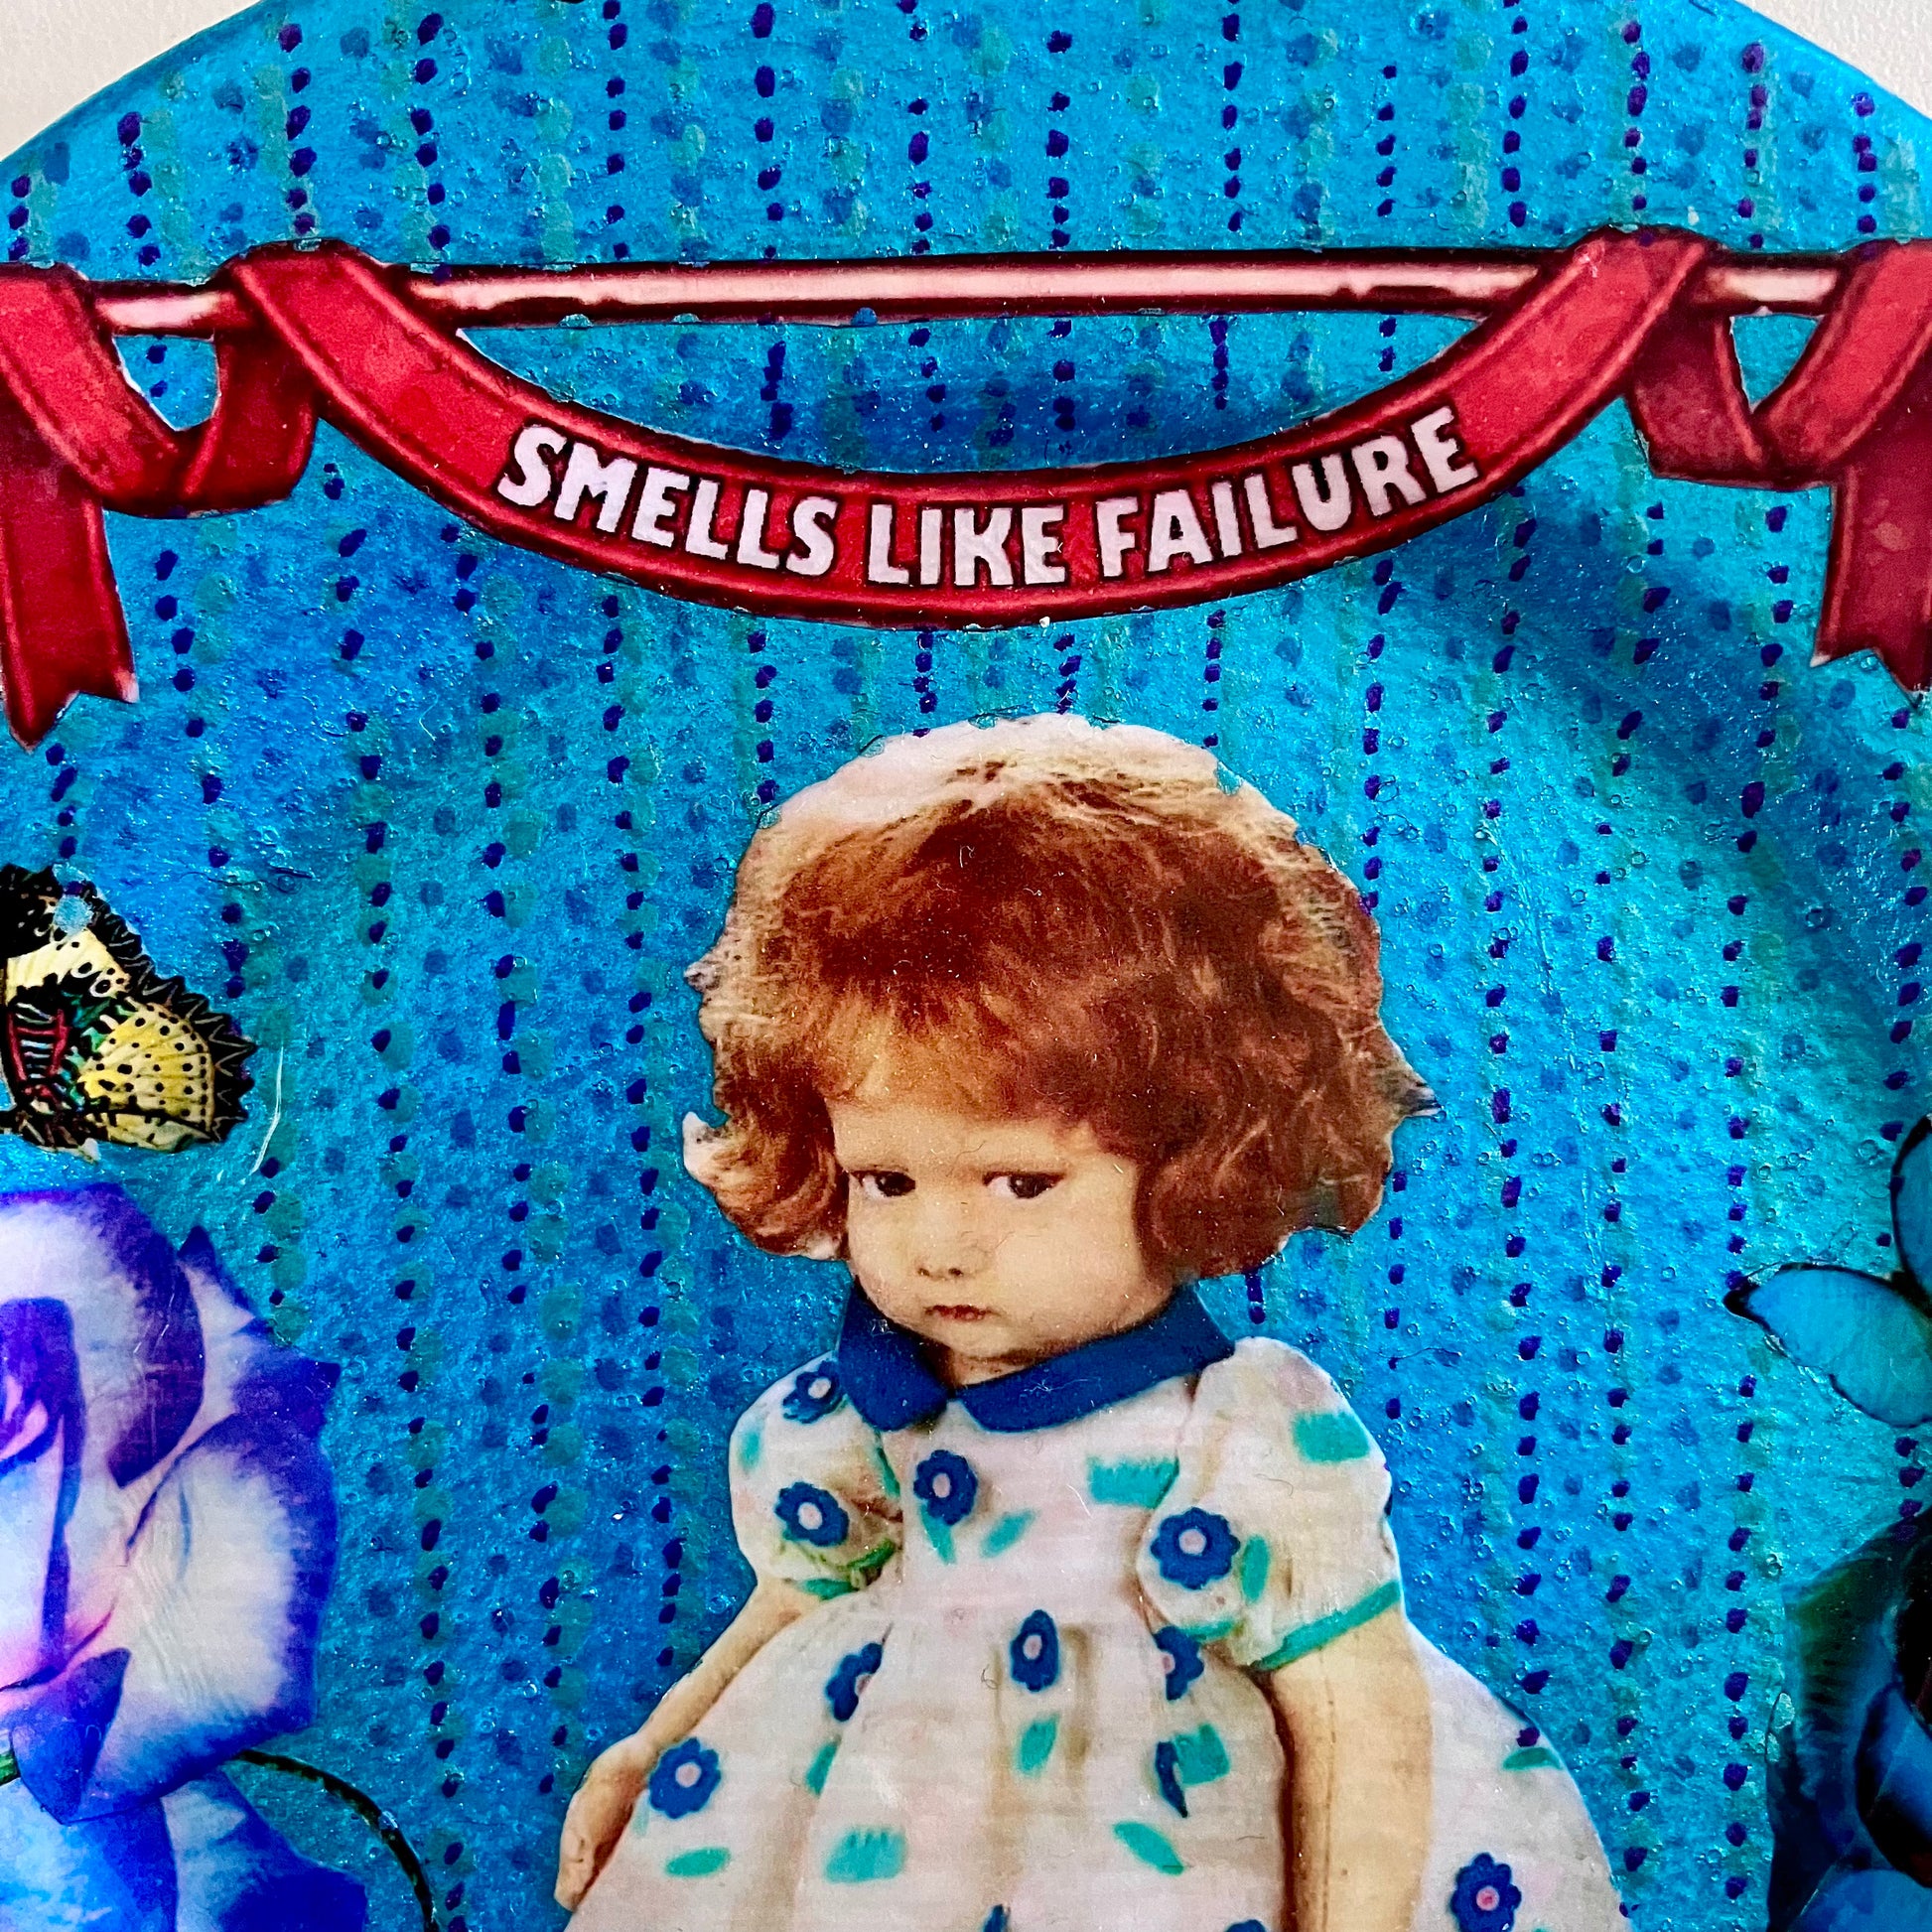 "Smells Like Failure" Wall Plate by House of Frisson, closeup detail showing a vintage doll and blue roses.